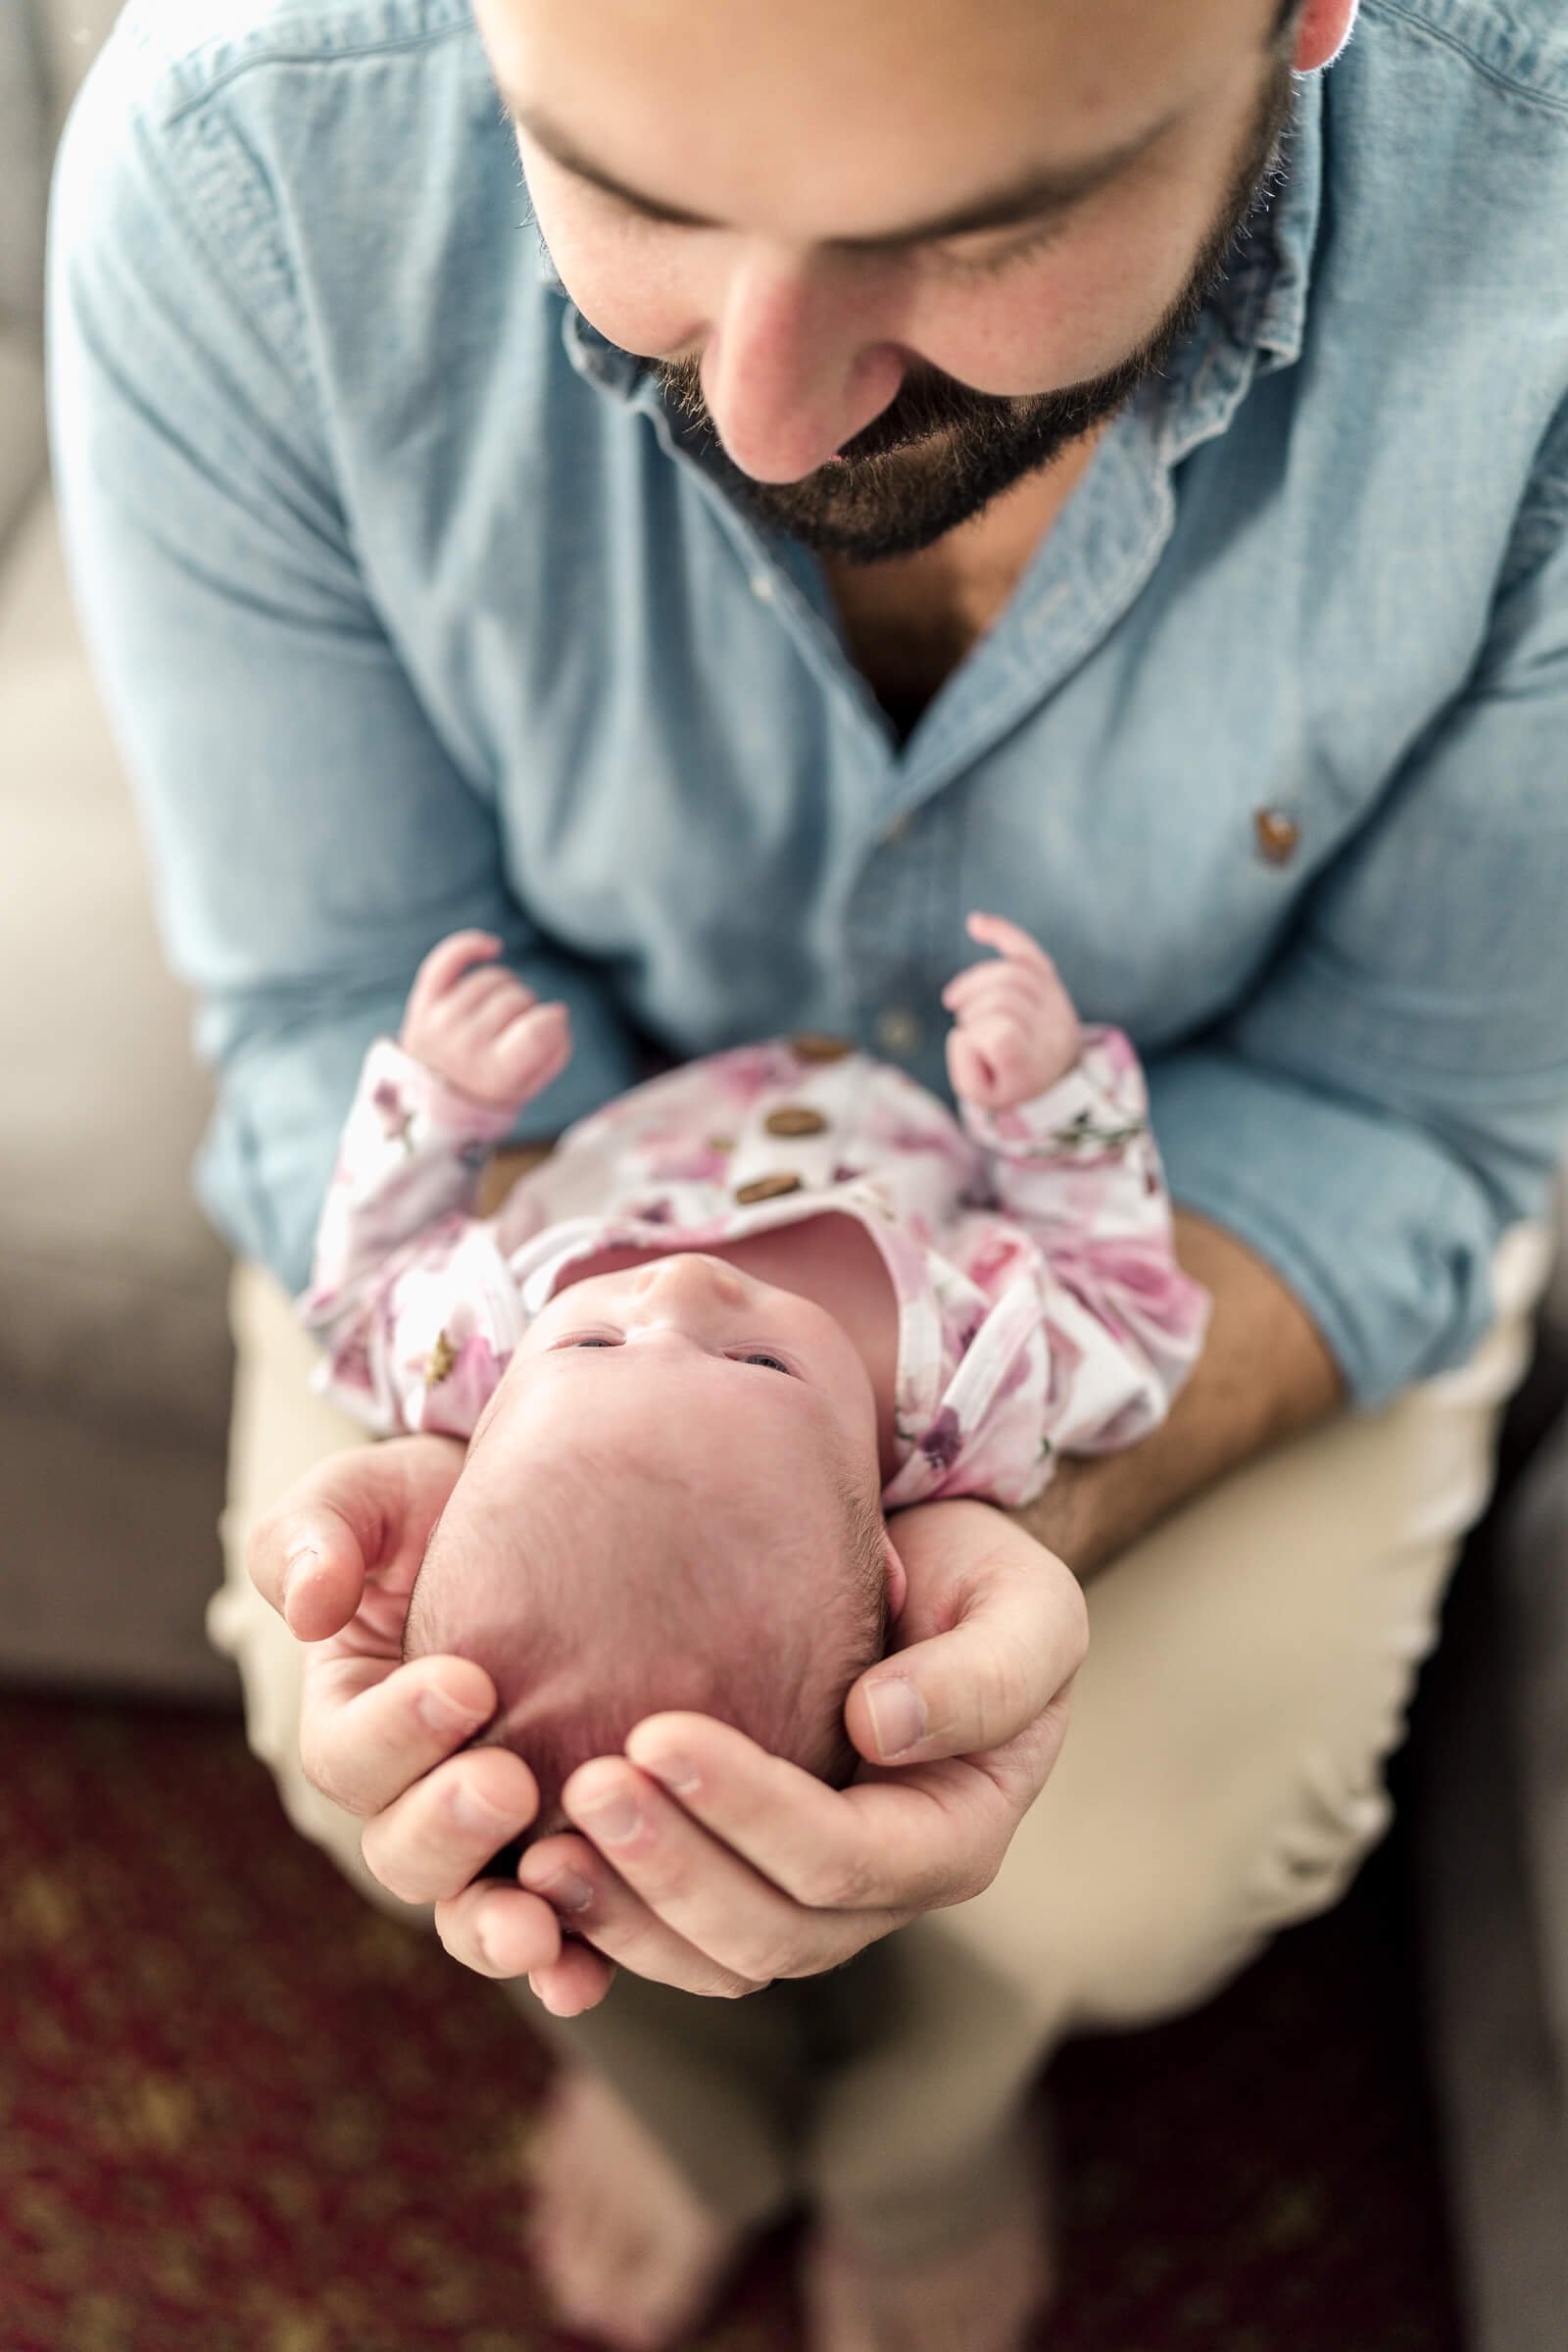 Father looks at his newborn daughter in his hands